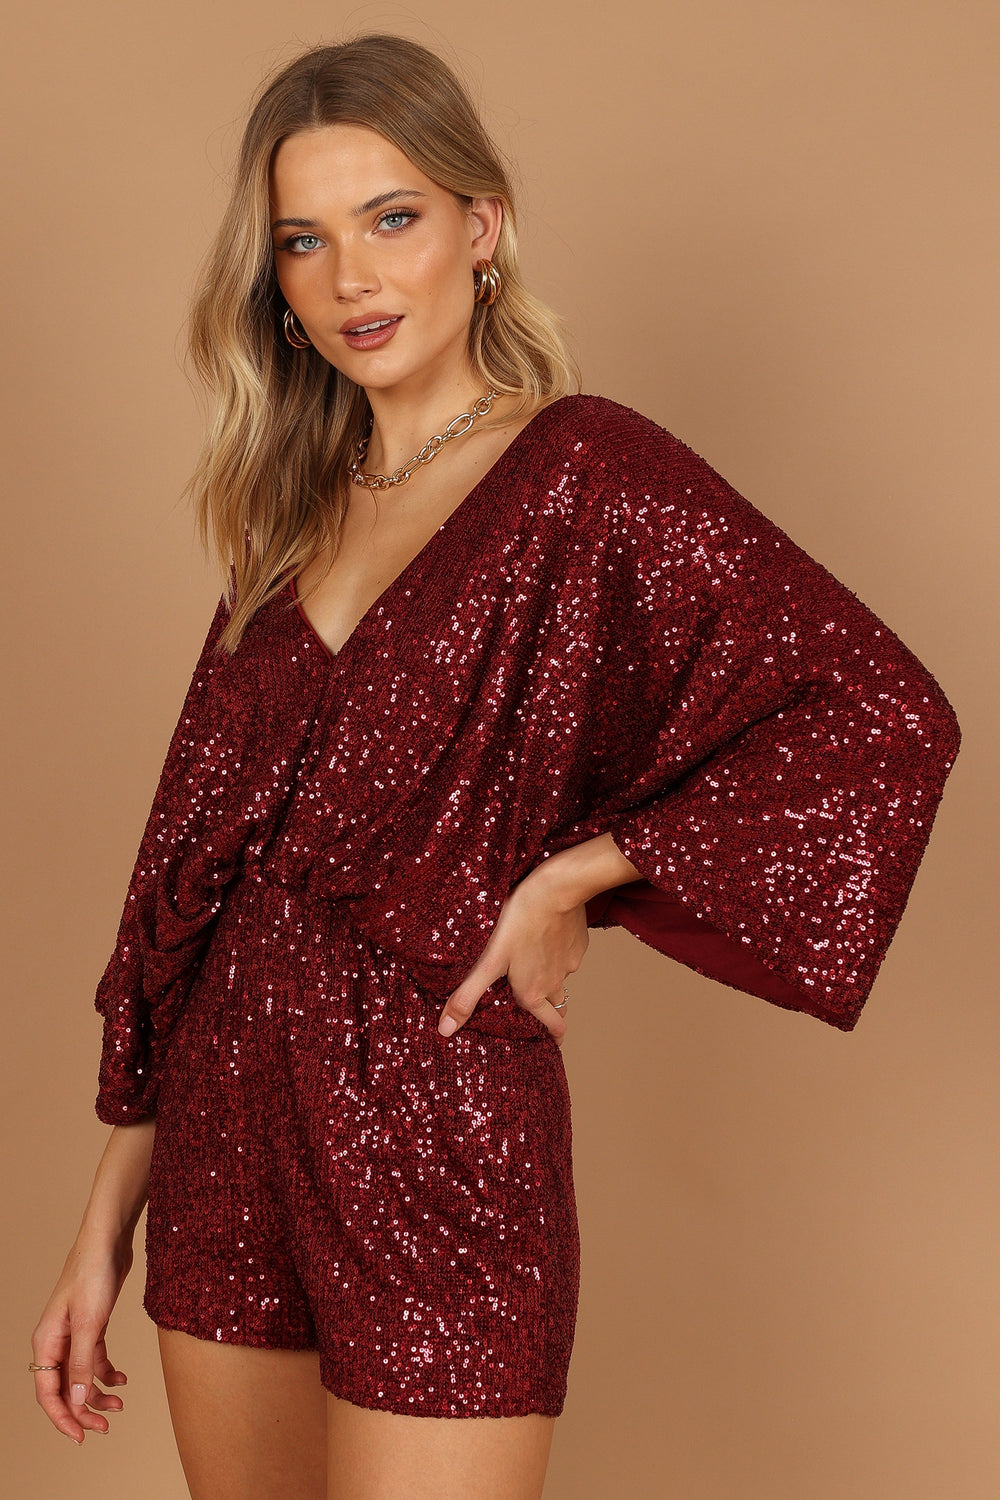 Petal and Pup USA Rompers Kimono Sleeve Sequin Romper - Burgundy